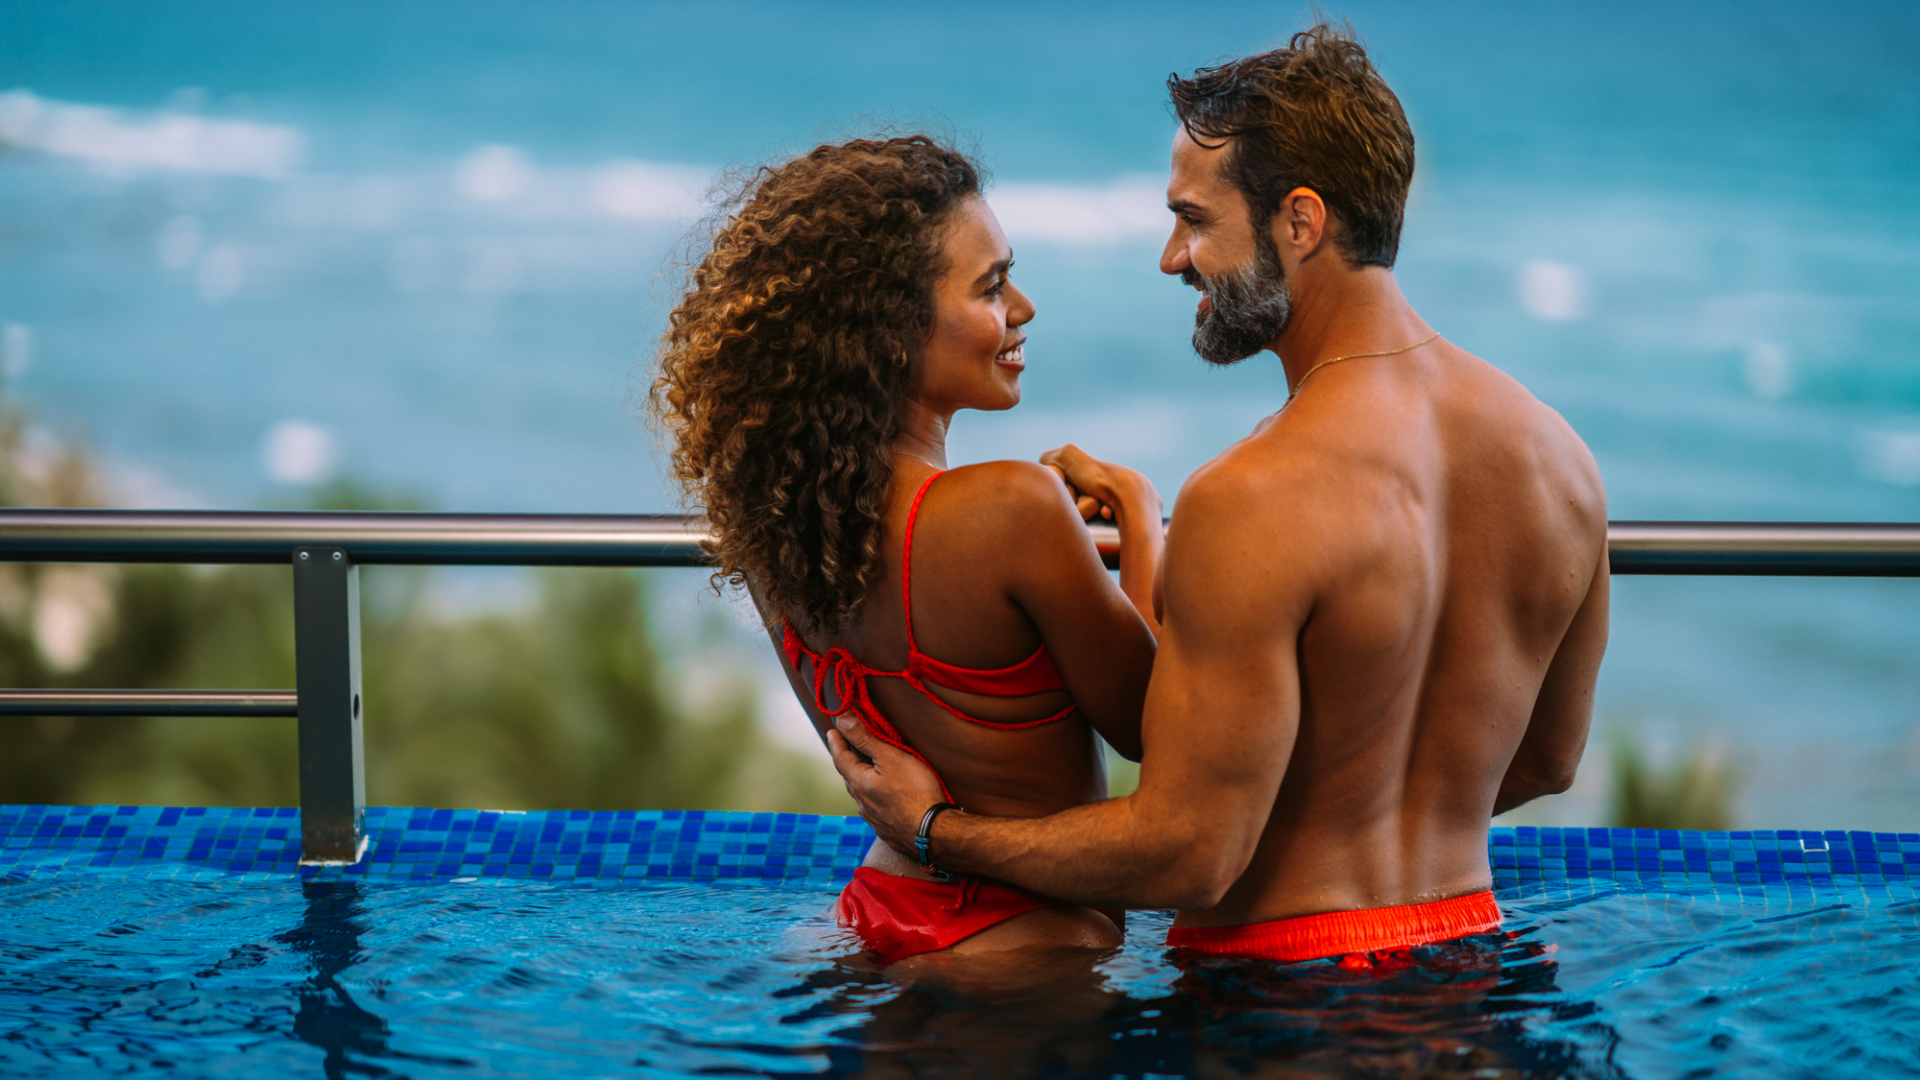 A Man And Woman In A Pool